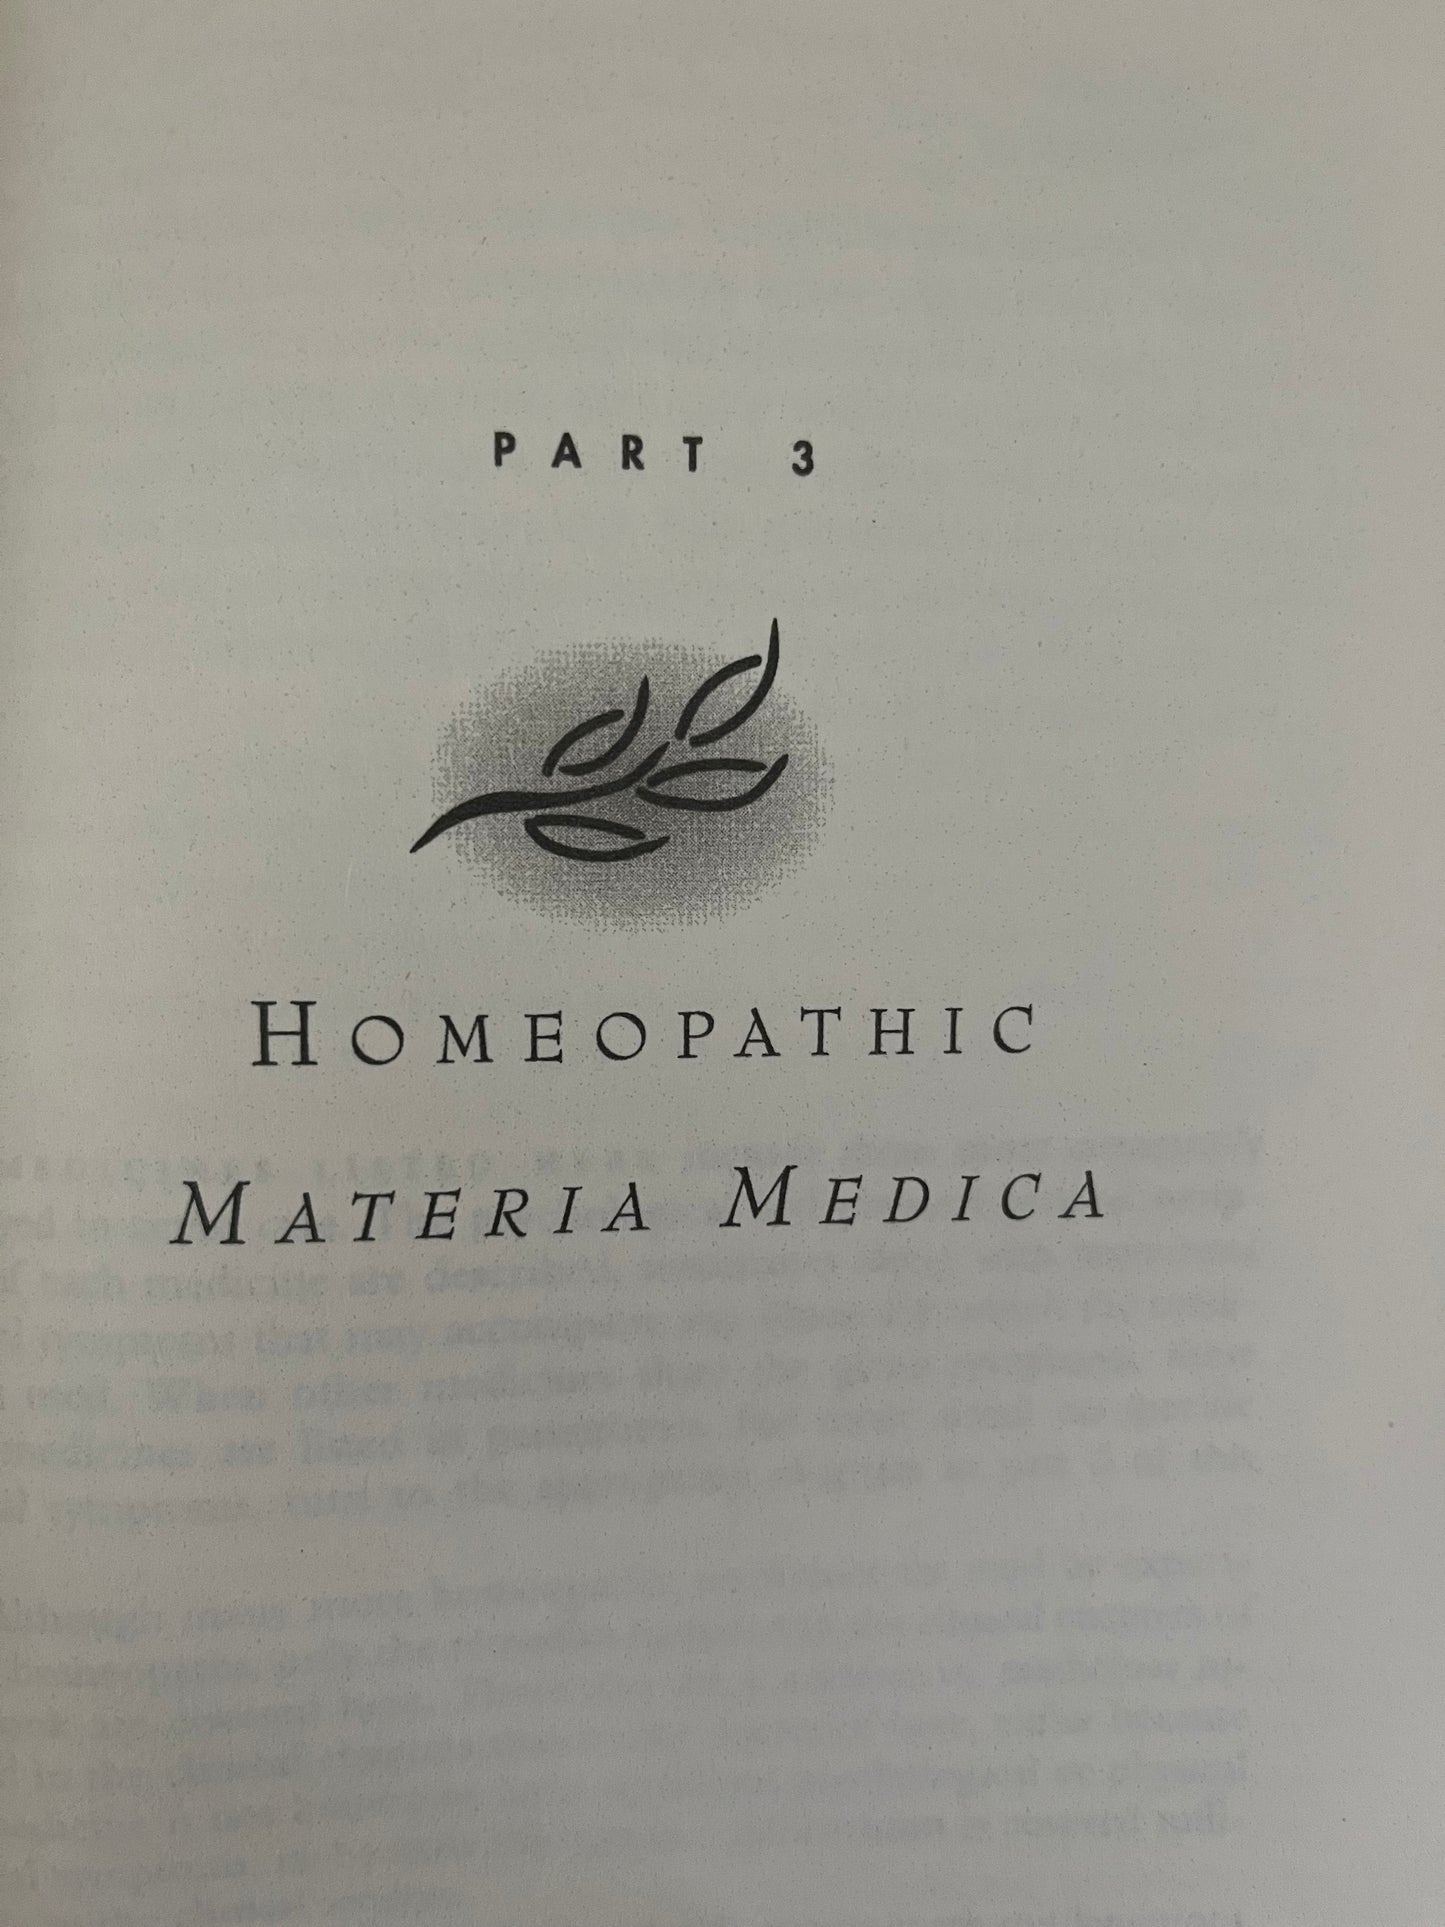 Parenting resource - EVERYBODY’S GUIDE TO HOMEOPATHIC MEDICINES